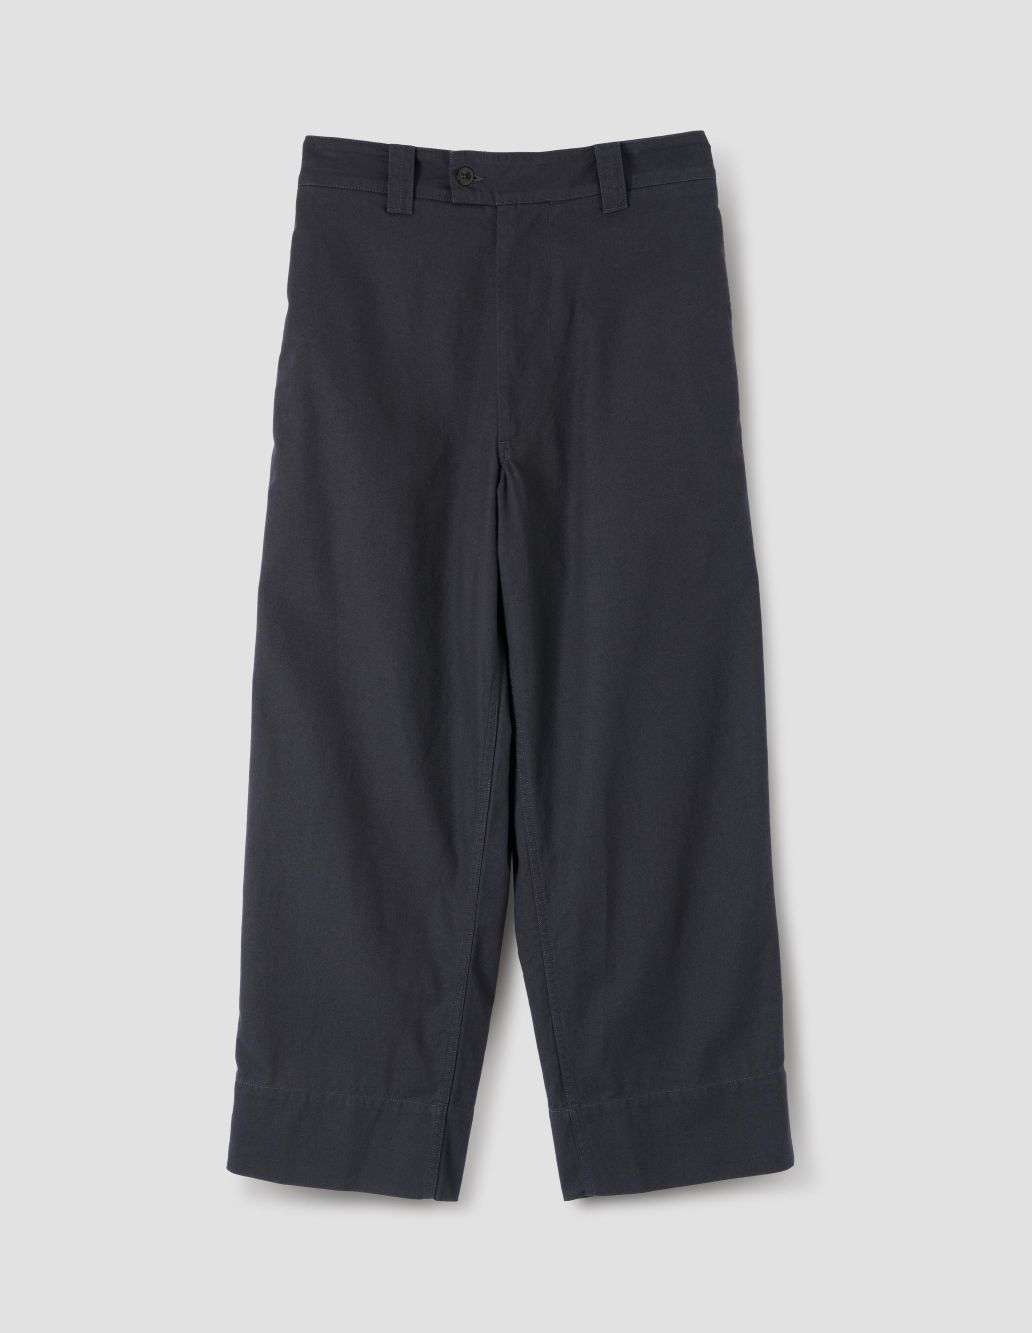 MARGARET HOWELL - Charcoal cotton painters trouser | MHL. by 